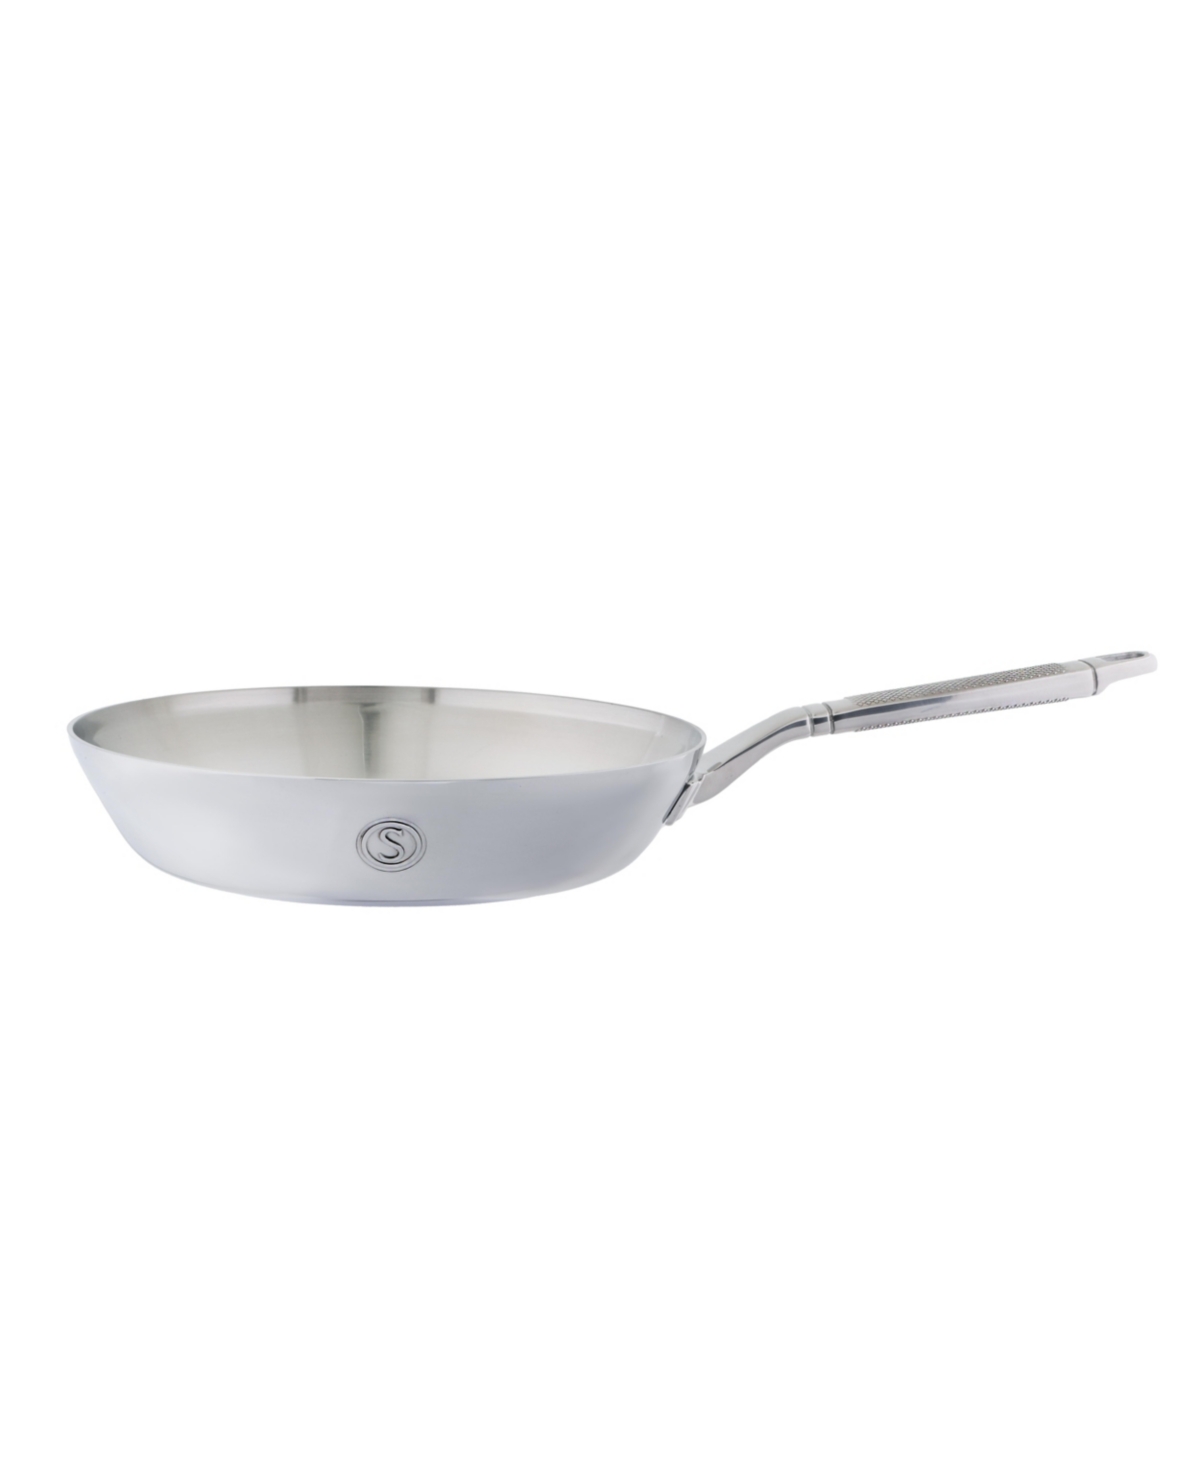 Saveur Selects Voyage Series Tri-ply Stainless Steel 10" Fry Pan In Silver